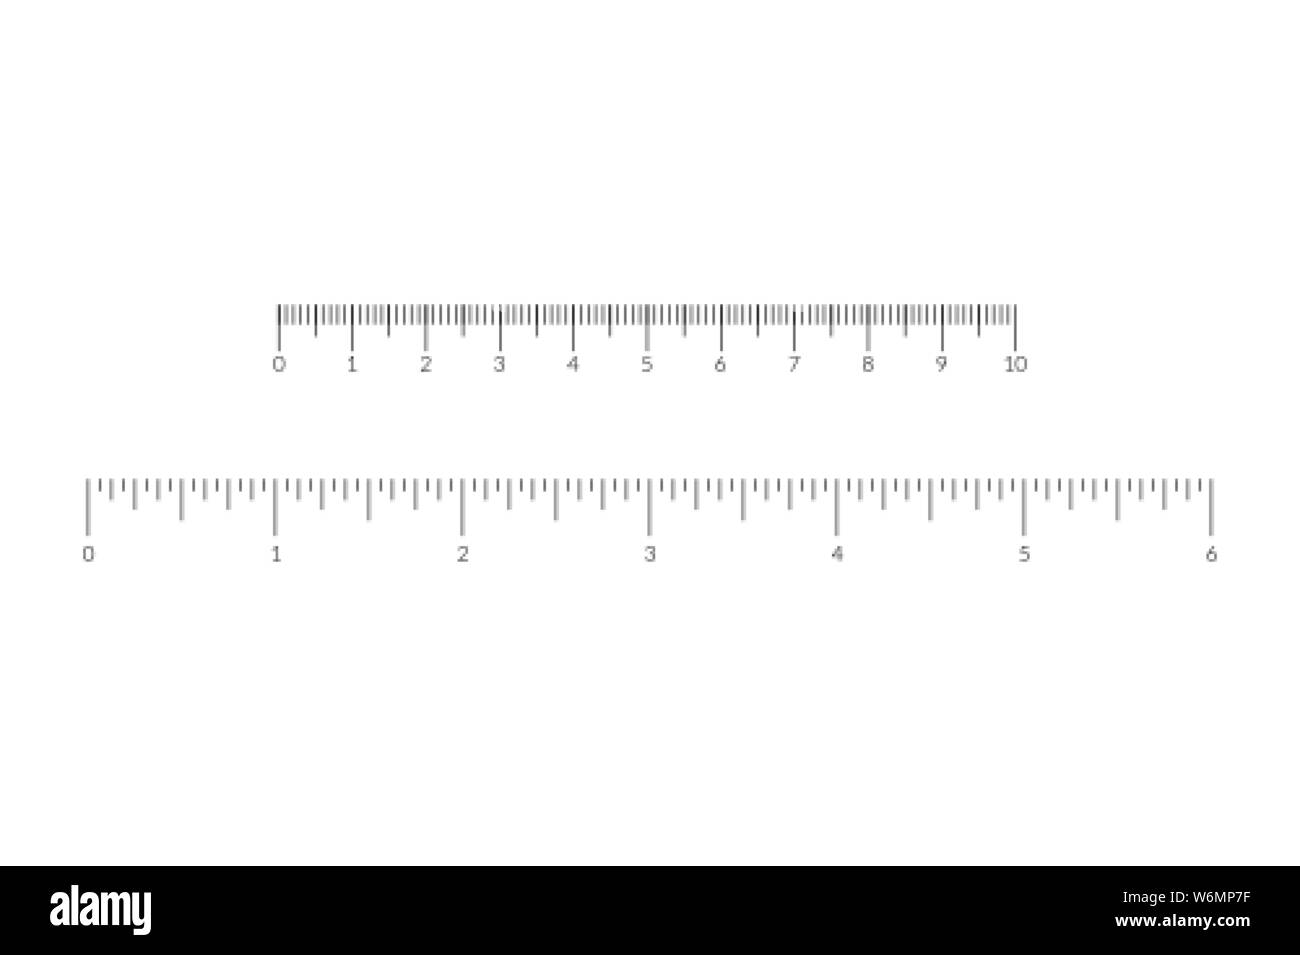 Imperial and metric units measure scale overlay bar for ruler Stock Vector